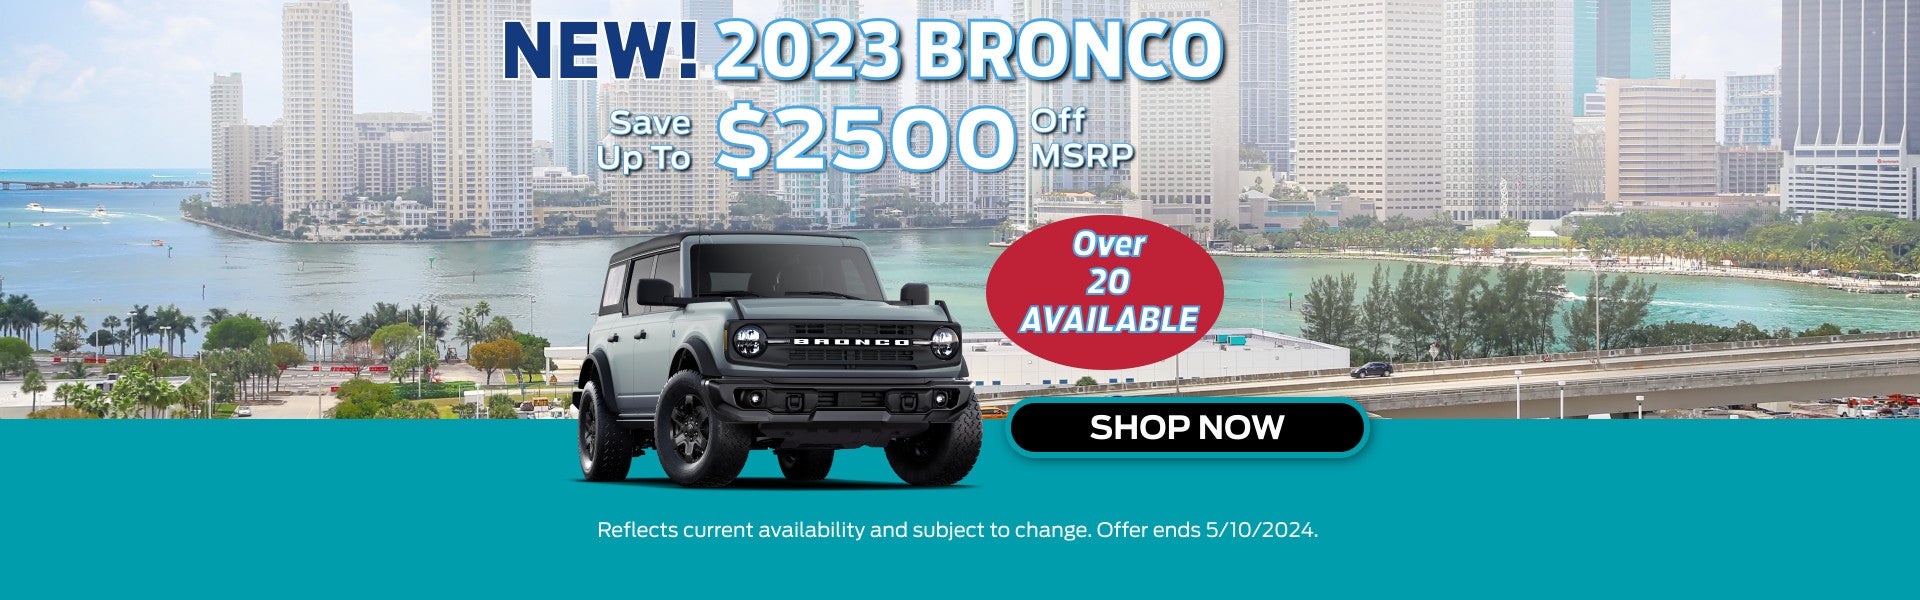 2023 Bronco, Up to $2,500 off